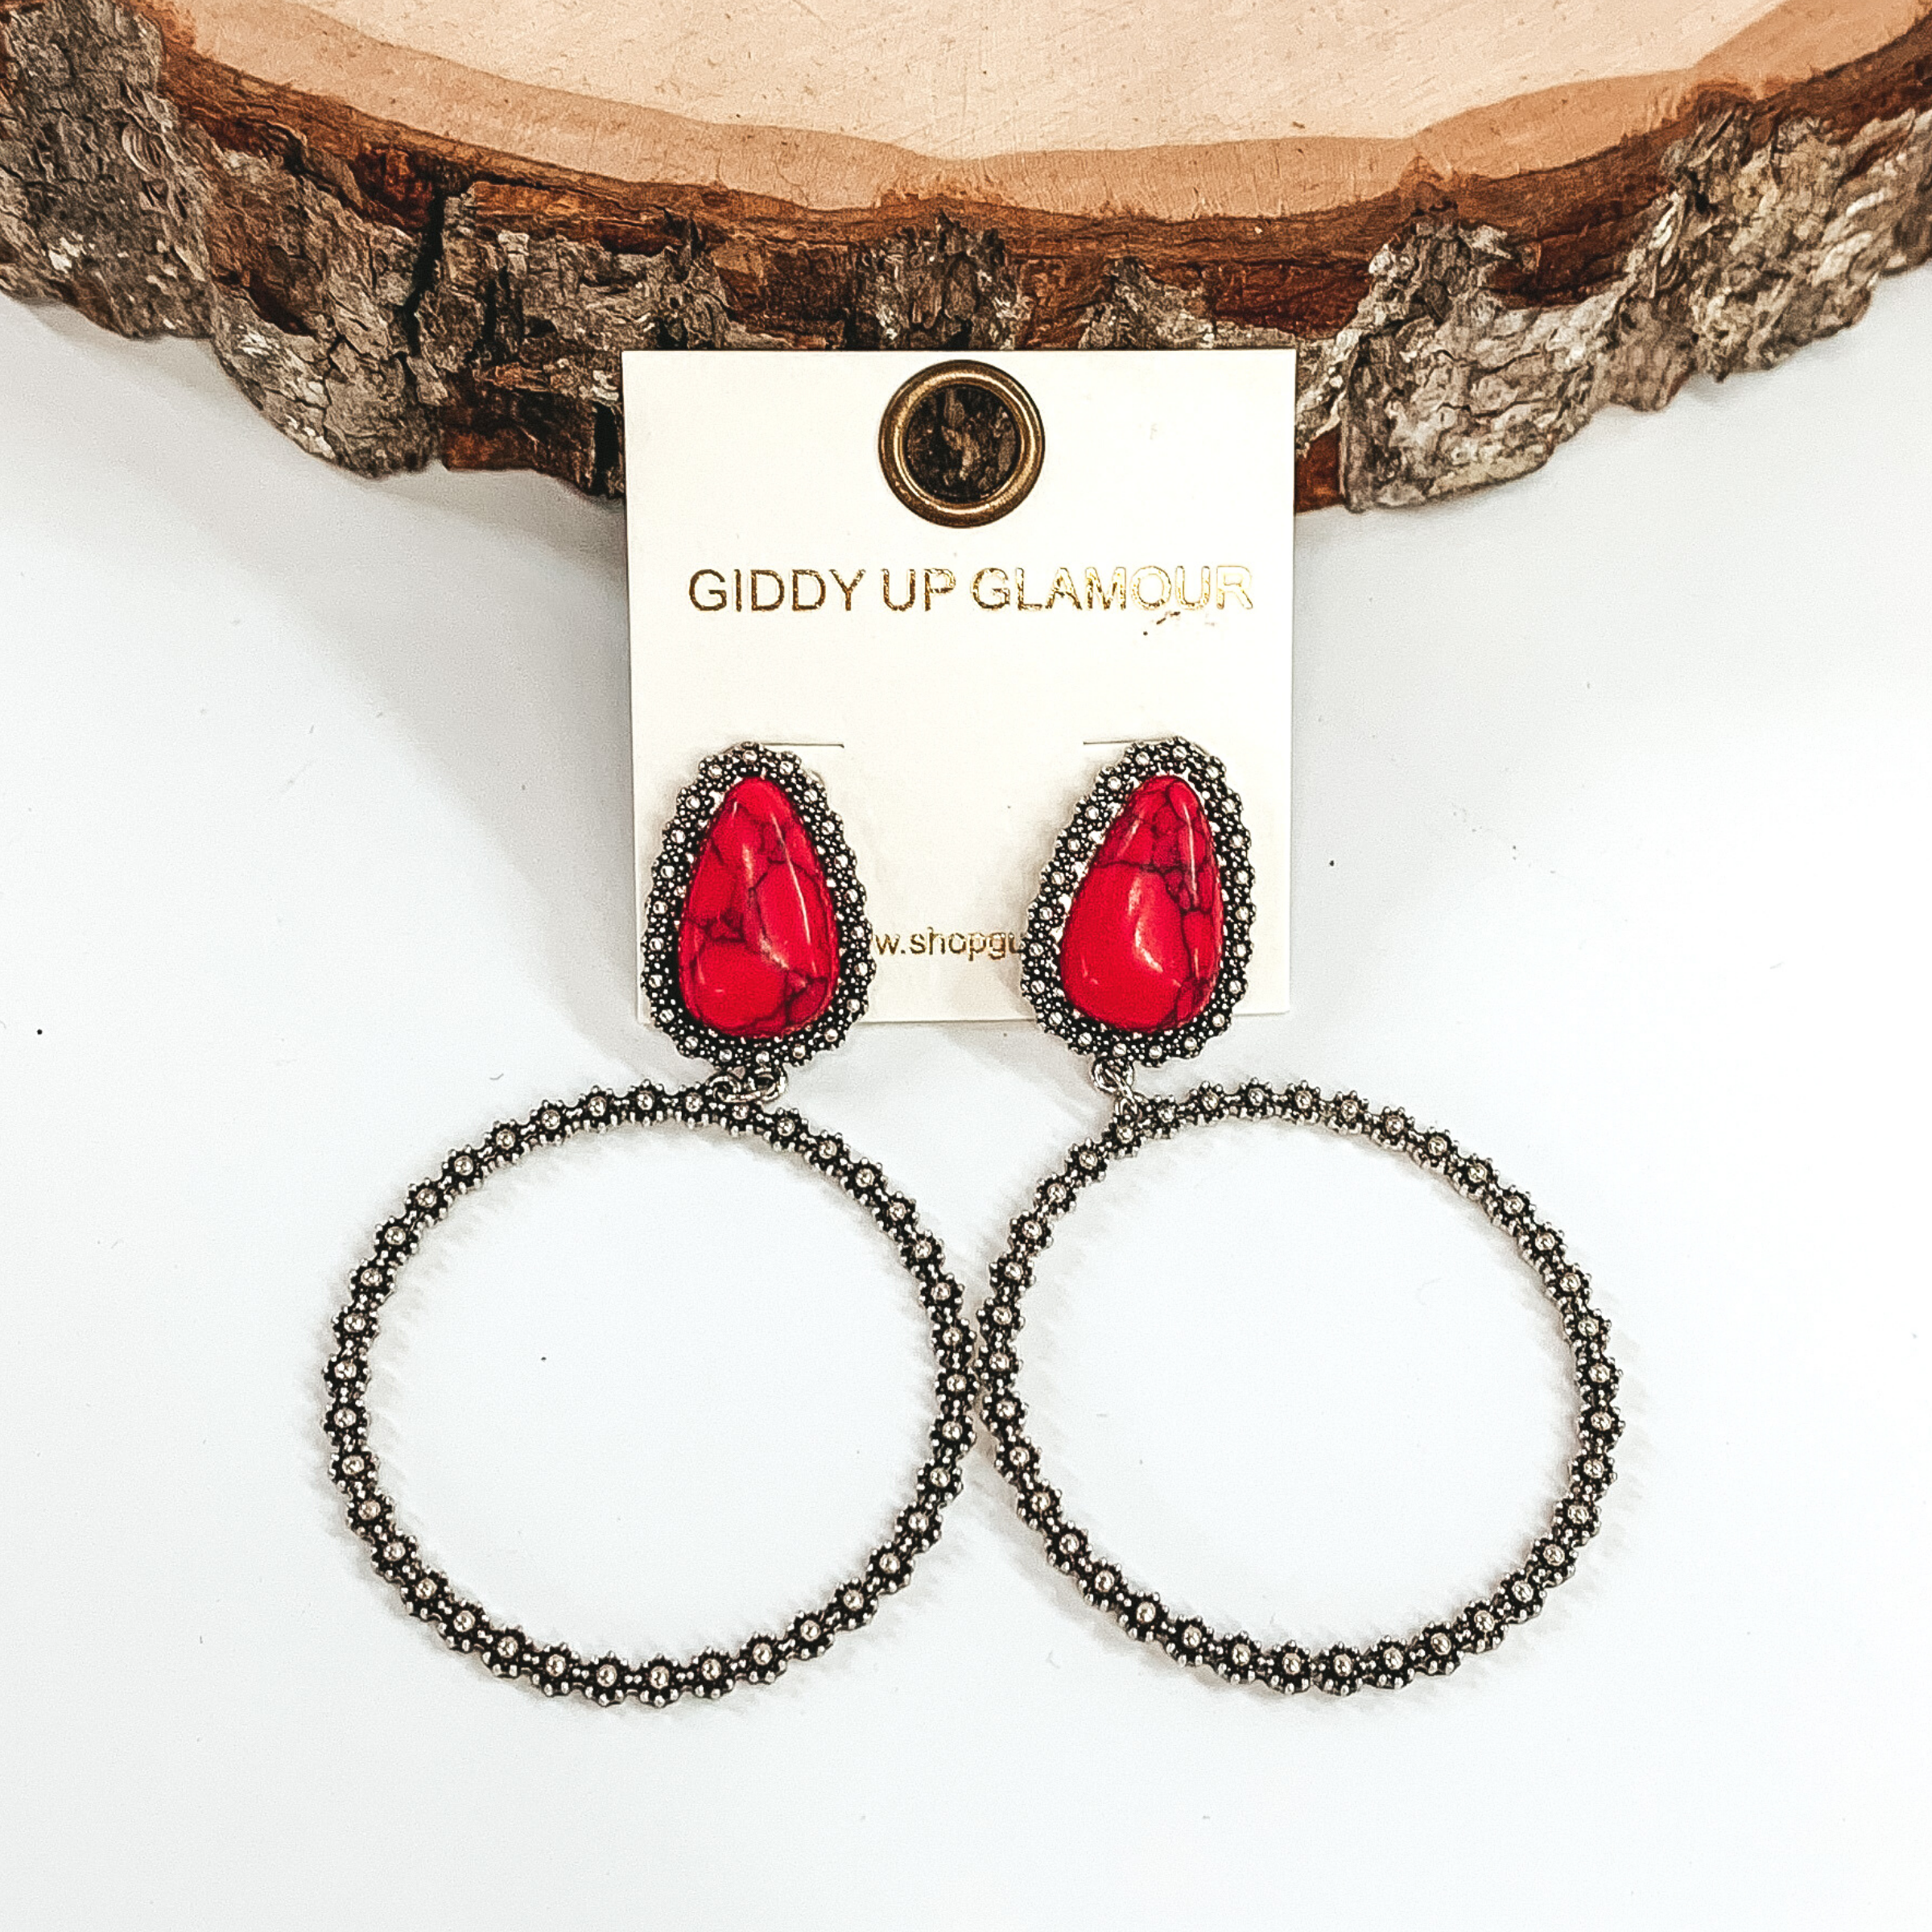 These earrings have red teardrop stone studs outlined in silver. At the bottom of the stones there is a hanging silver circle. These earrings are pictured on a white background laying against a piece of wood.